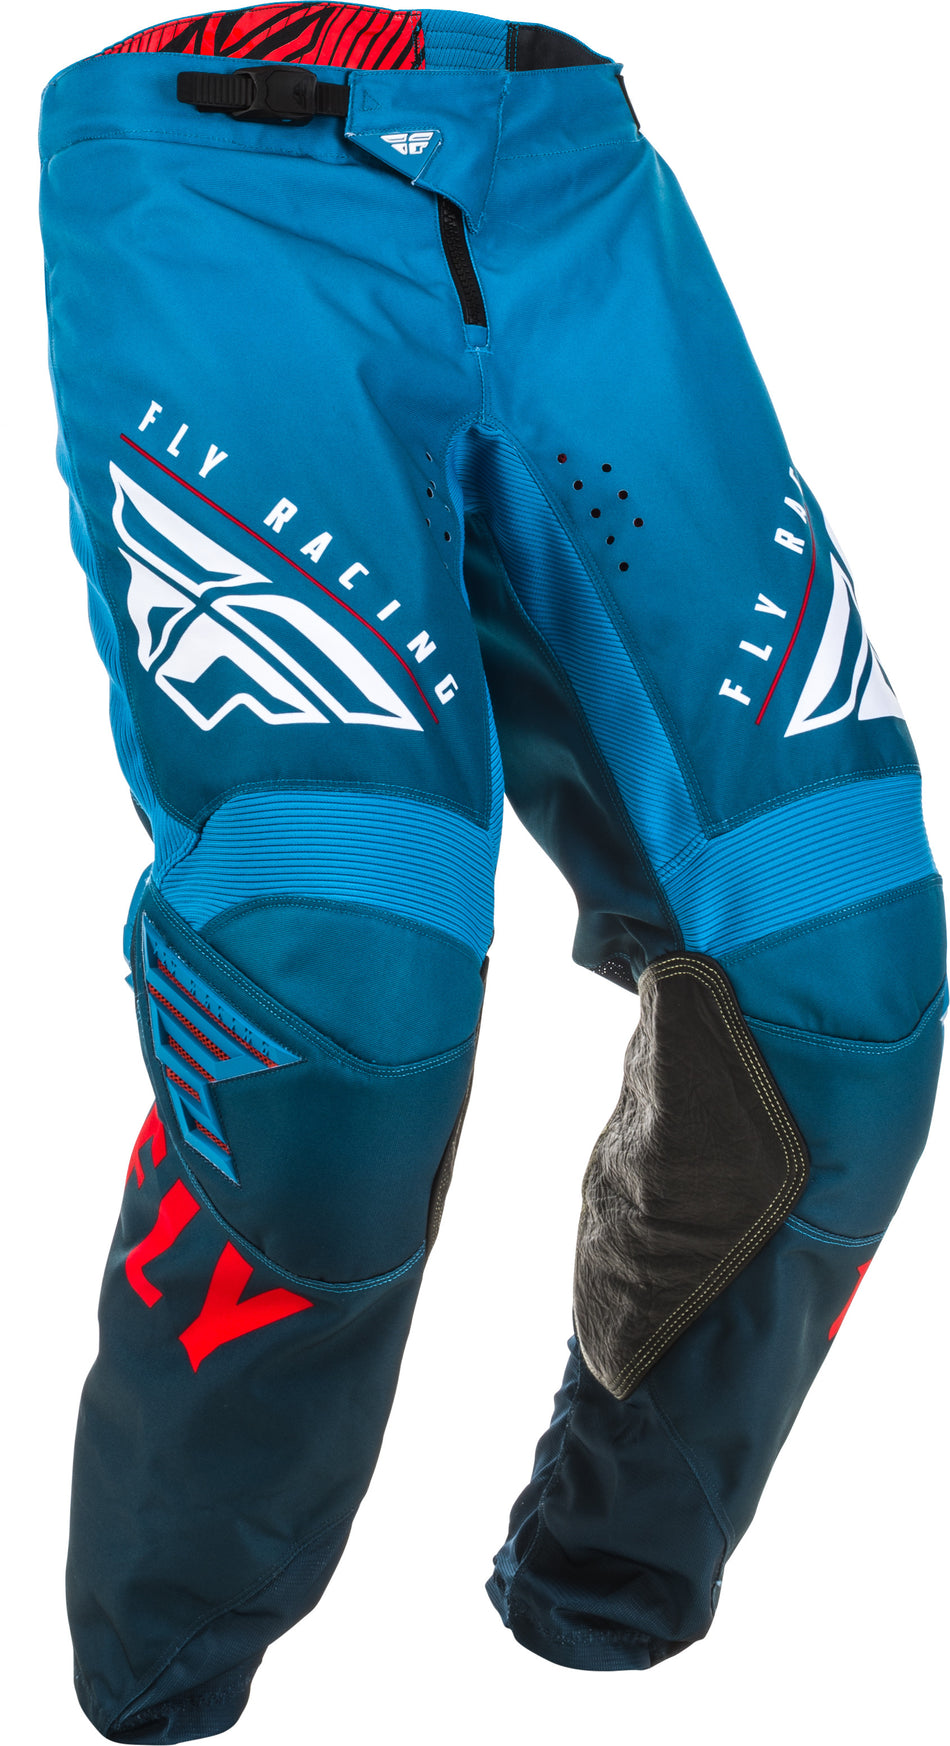 FLY RACING Kinetic K220 Pants Blue/White/Red Sz 30 373-53130